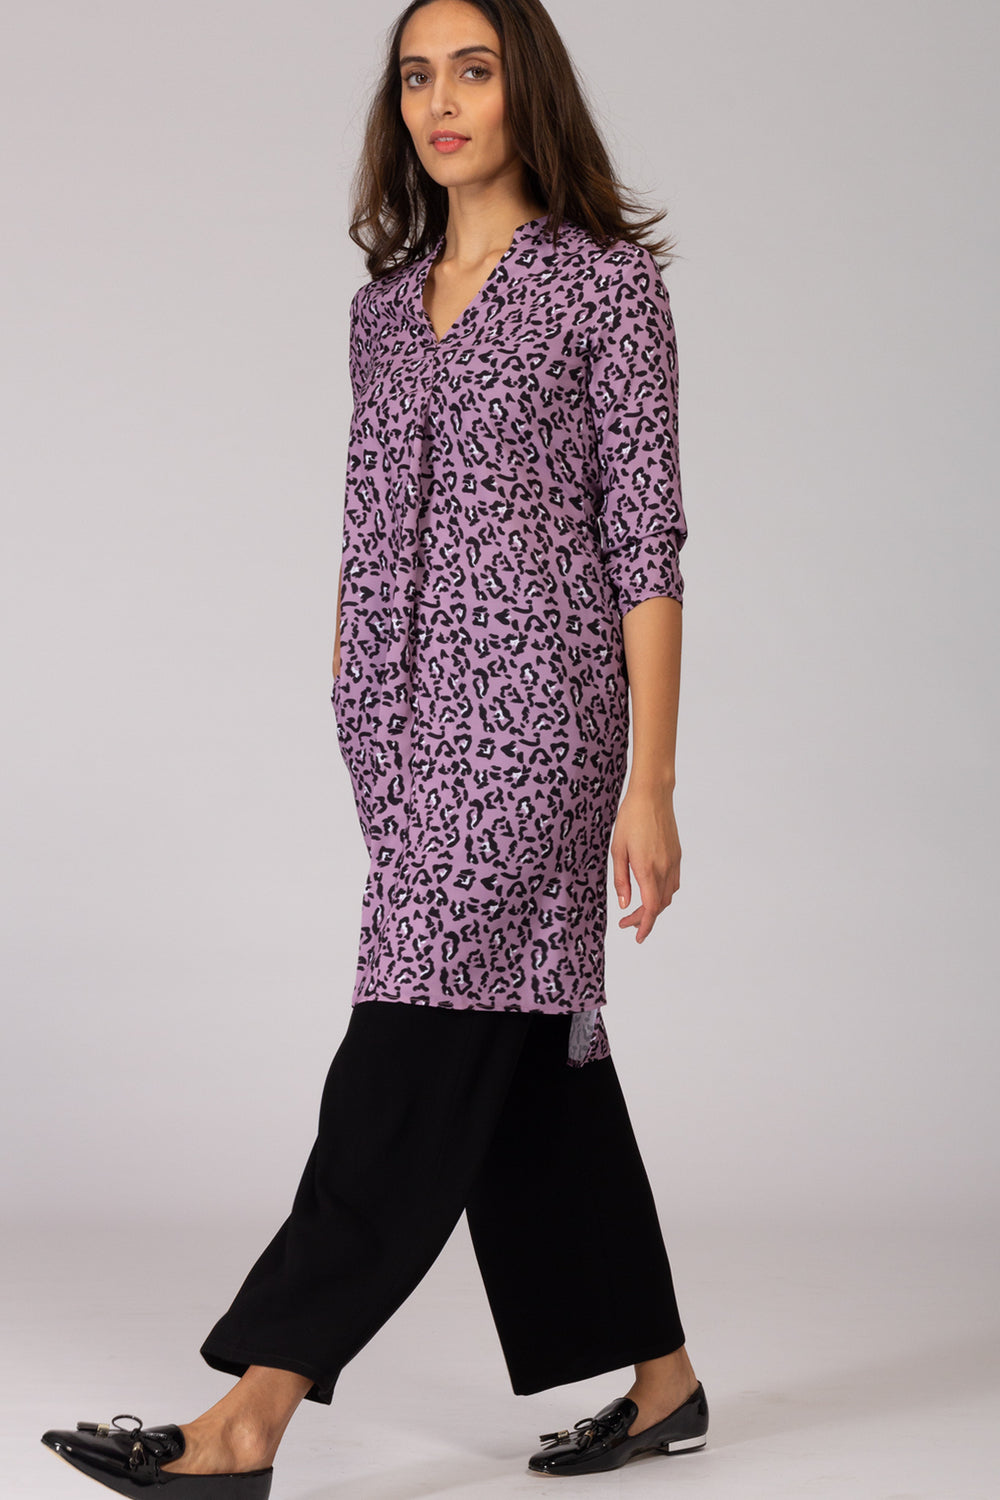 Philly Printed Tunic